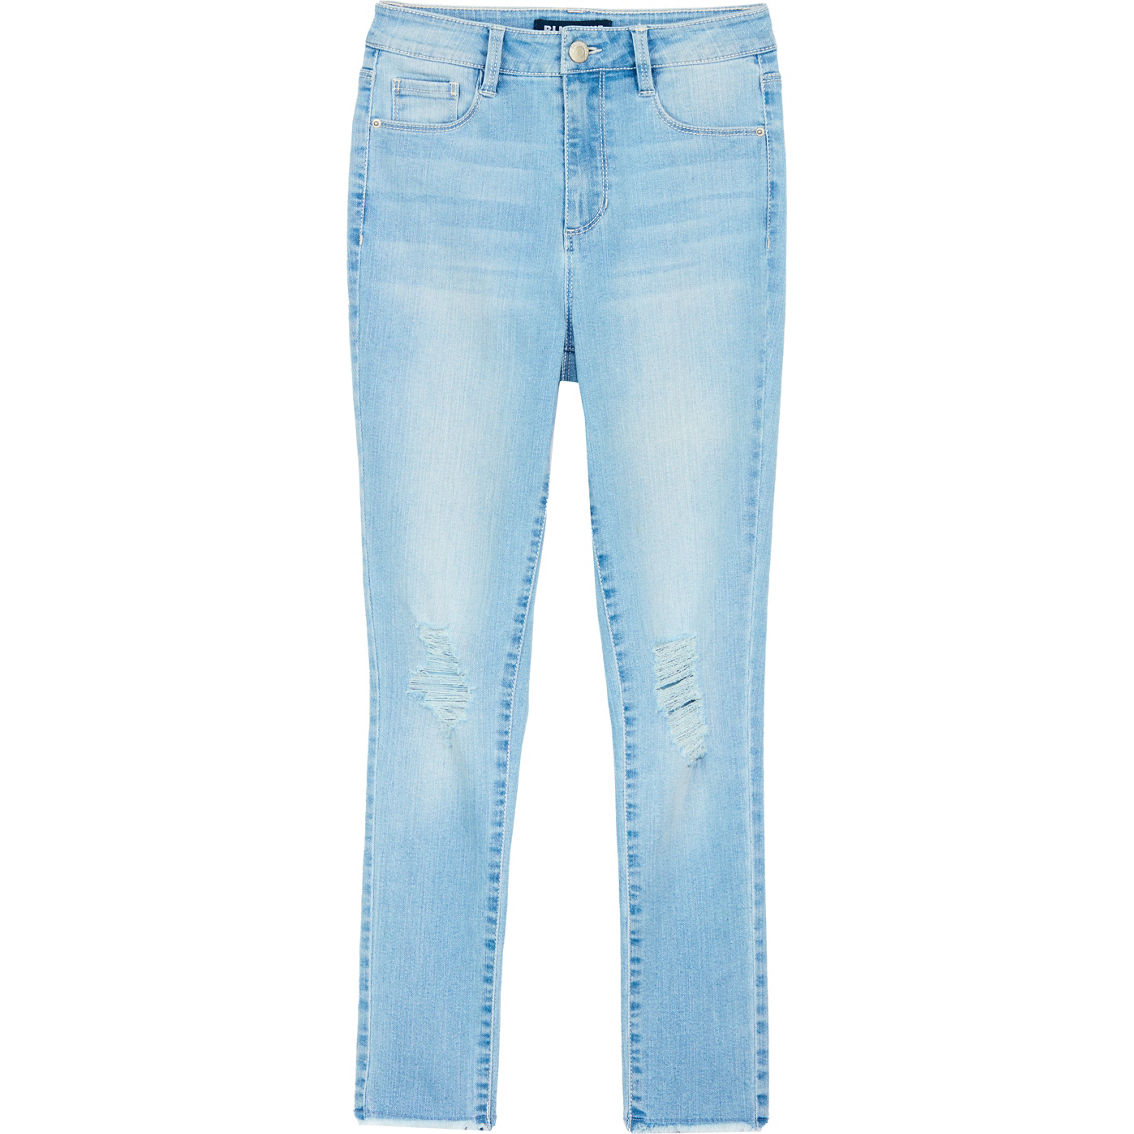 Squeeze Girls Blue Spice 90s Fit Jeans | Girls 7-16 | Clothing ...